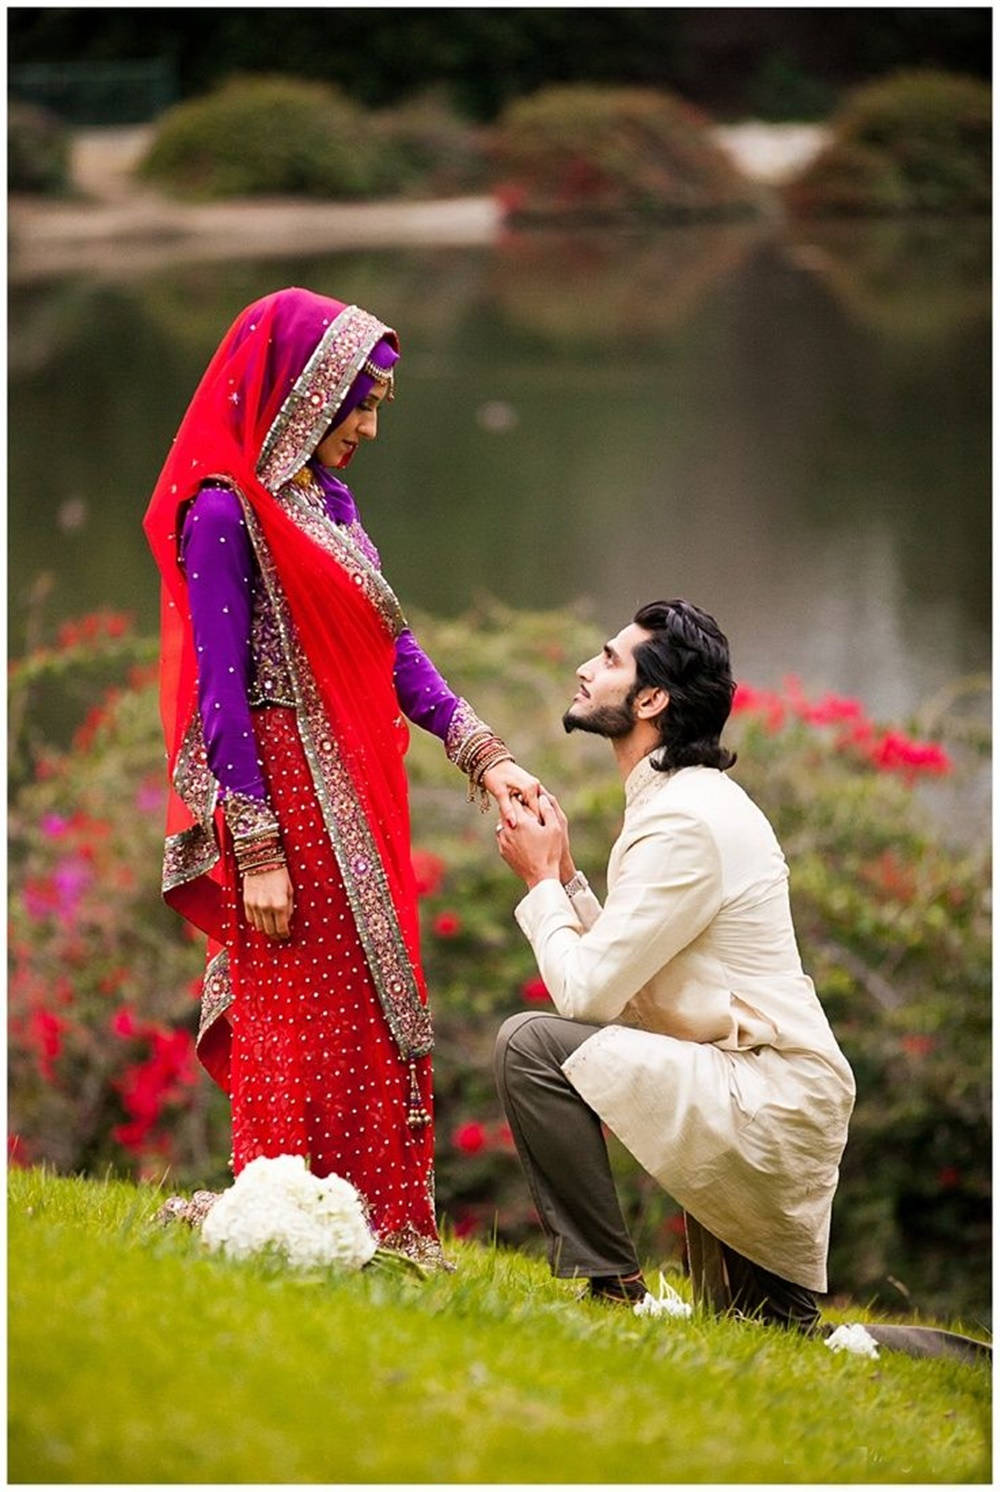 Propose Day 2019 Images & HD Wallpapers for Free Download Online: Wish  Happy Propose Day With Romantic GIF Greetings & WhatsApp Sticker Messages  During Valentine Week | 🙏🏻 LatestLY